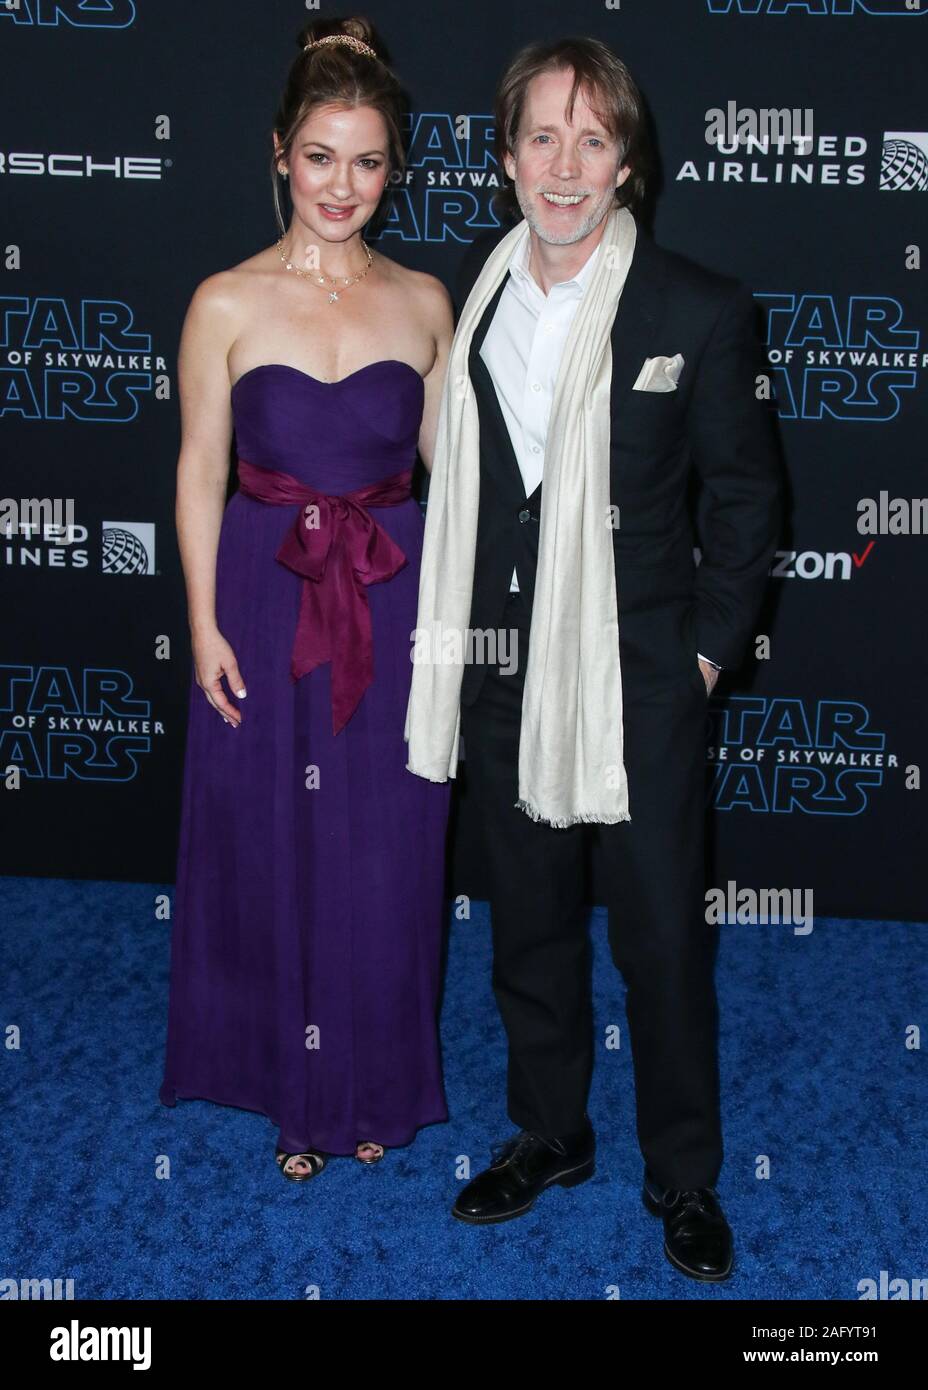 HOLLYWOOD, LOS ANGELES, CALIFORNIA, USA - DECEMBER 16: Catherine Taber and James Arnold Taylor arrive at the World Premiere Of Disney's 'Star Wars: The Rise Of Skywalker' held at the El Capitan Theatre on December 16, 2019 in Hollywood, Los Angeles, California, United States. (Photo by Xavier Collin/Image Press Agency) Stock Photo